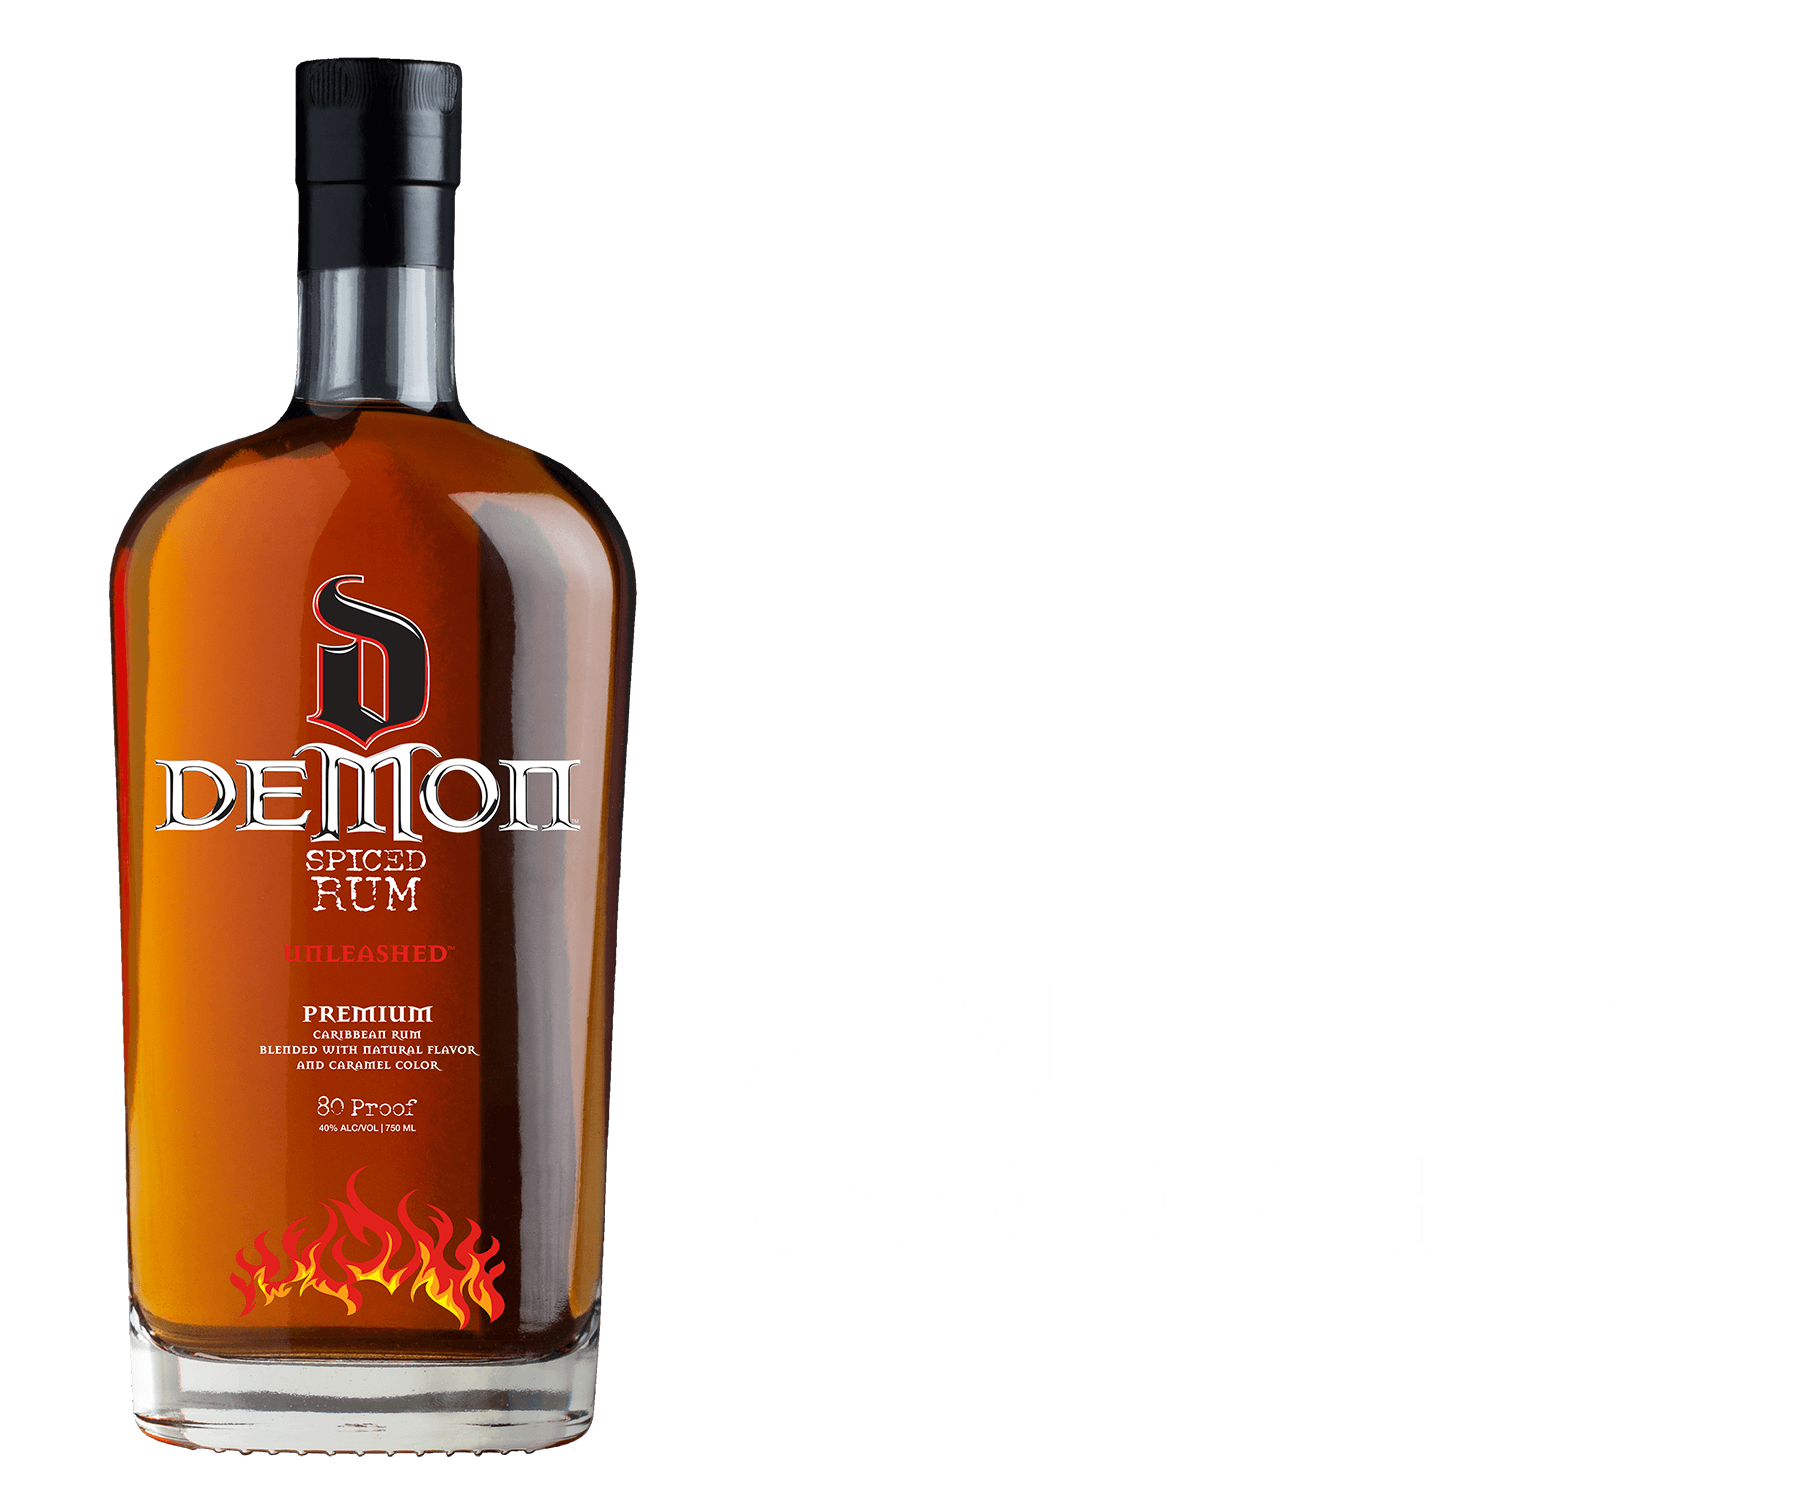 demon-rum-spiced-bottle-sinfully-smooth